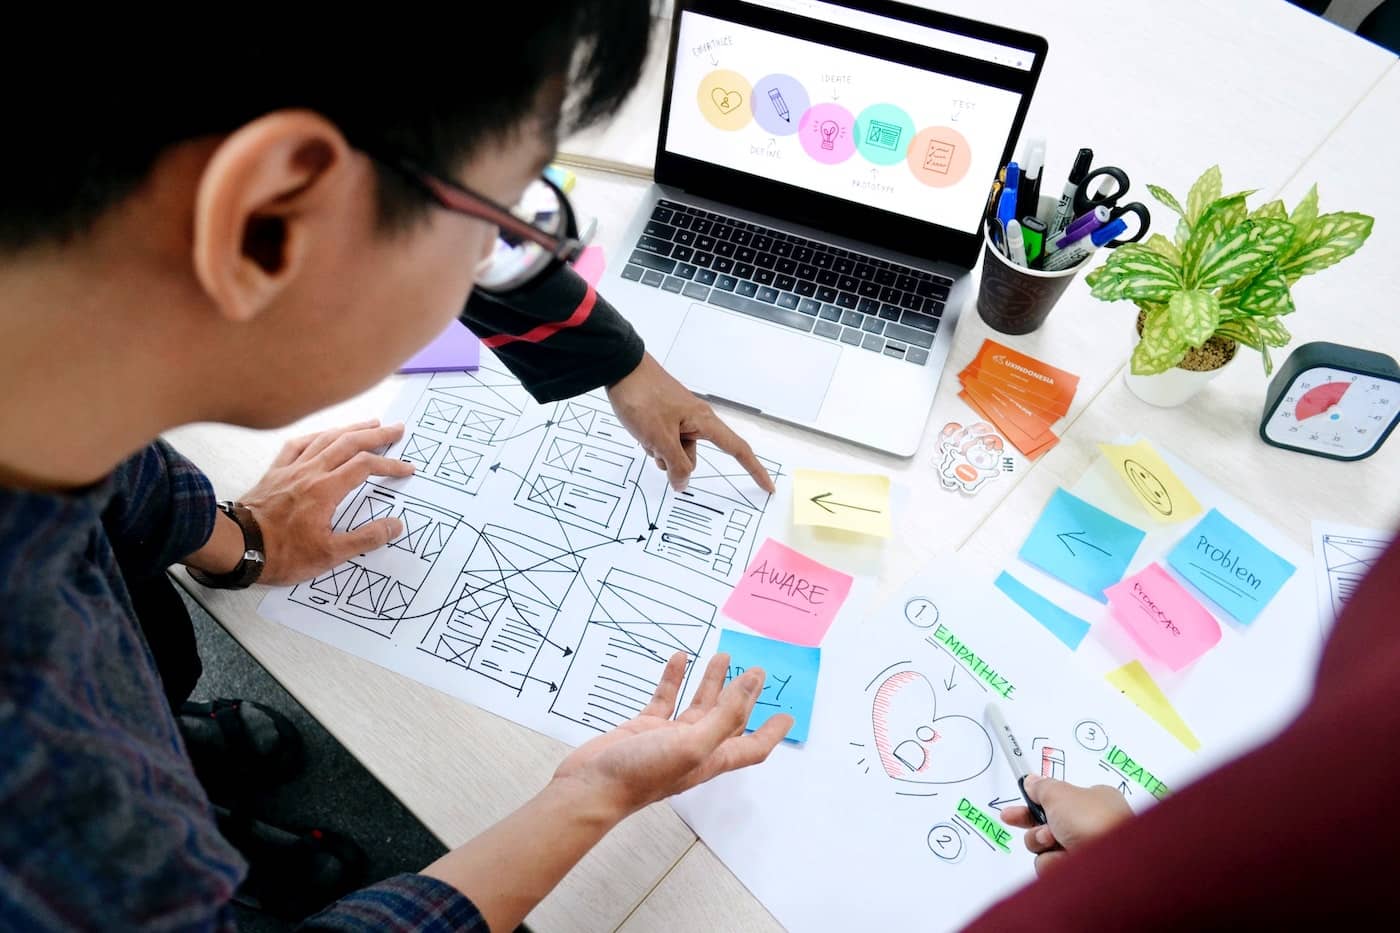 From Good to Great: How UX Design Can Take Your Software Product to the Next Level